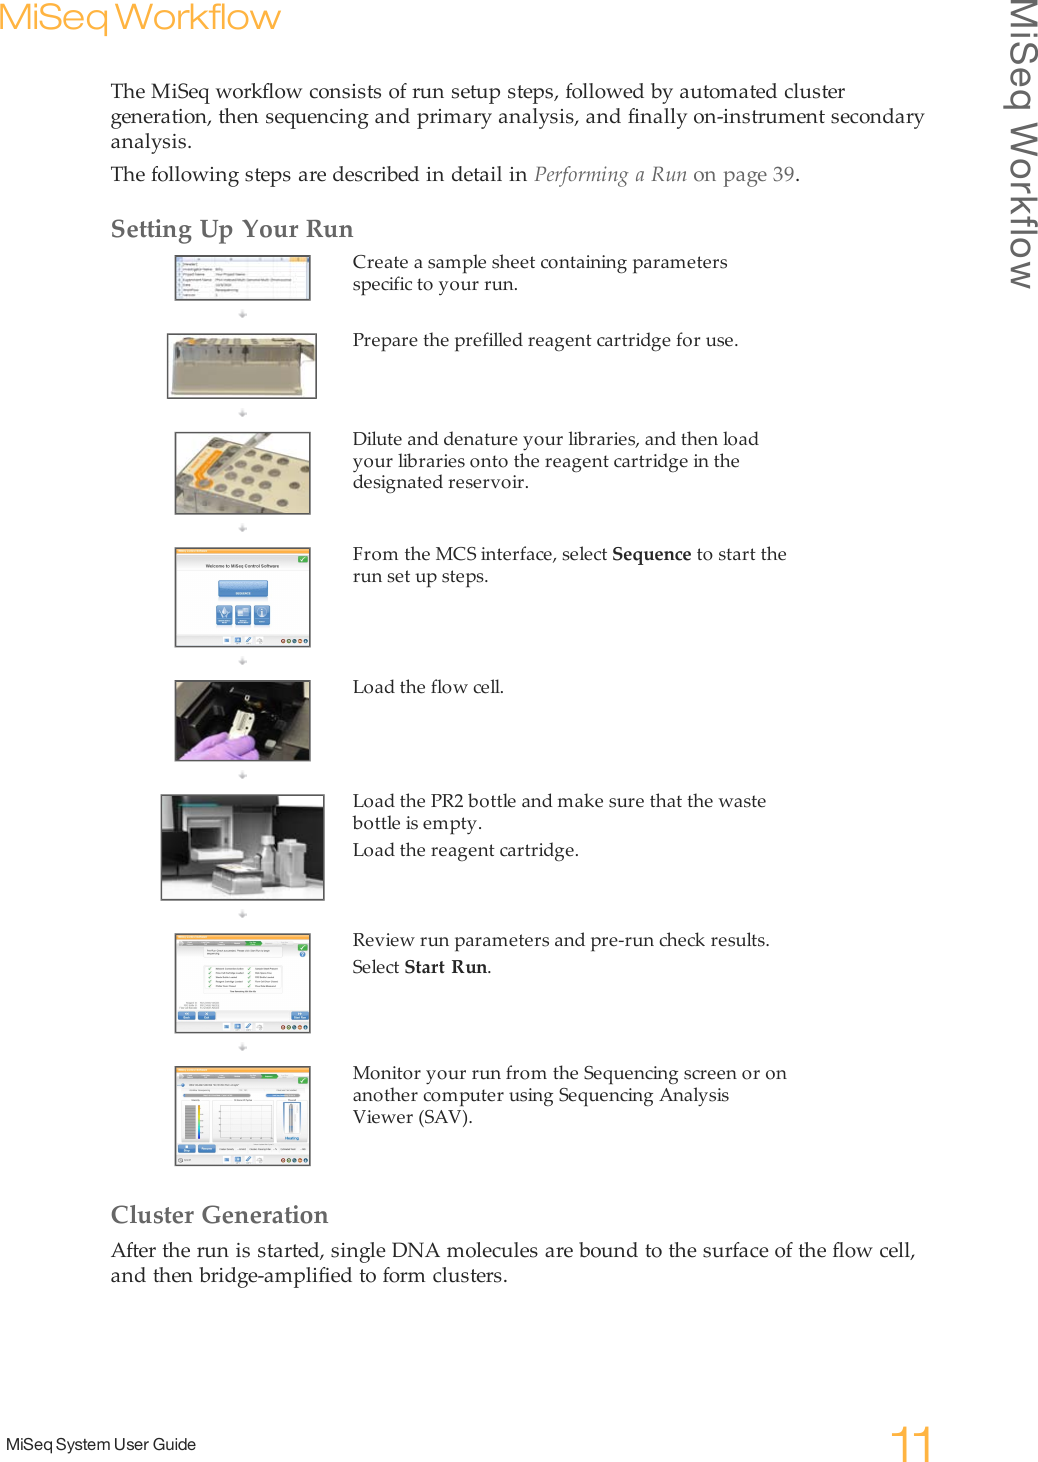 MiSeq WorkflowMiSeq System User Guide 11MiSeq WorkflowThe MiSeq workflow consists of run setup steps, followed by automated clustergeneration, then sequencing and primary analysis, and finally on-instrument secondaryanalysis.The following steps are described in detail in Performing a Run on page 39.Setting Up Your RunCreate a sample sheet containing parametersspecific to your run.Prepare the prefilled reagent cartridge for use.Dilute and denature your libraries, and then loadyour libraries onto the reagent cartridge in thedesignated reservoir.From the MCS interface, select Sequence to start therun set up steps.Load the flow cell.Load the PR2 bottle and make sure that the wastebottle is empty.Load the reagent cartridge.Review run parameters and pre-run check results.Select Start Run.Monitor your run from the Sequencing screen or onanother computer using Sequencing AnalysisViewer (SAV).Cluster GenerationAfter the run is started, single DNA molecules are bound to the surface of the flow cell,and then bridge-amplified to form clusters.